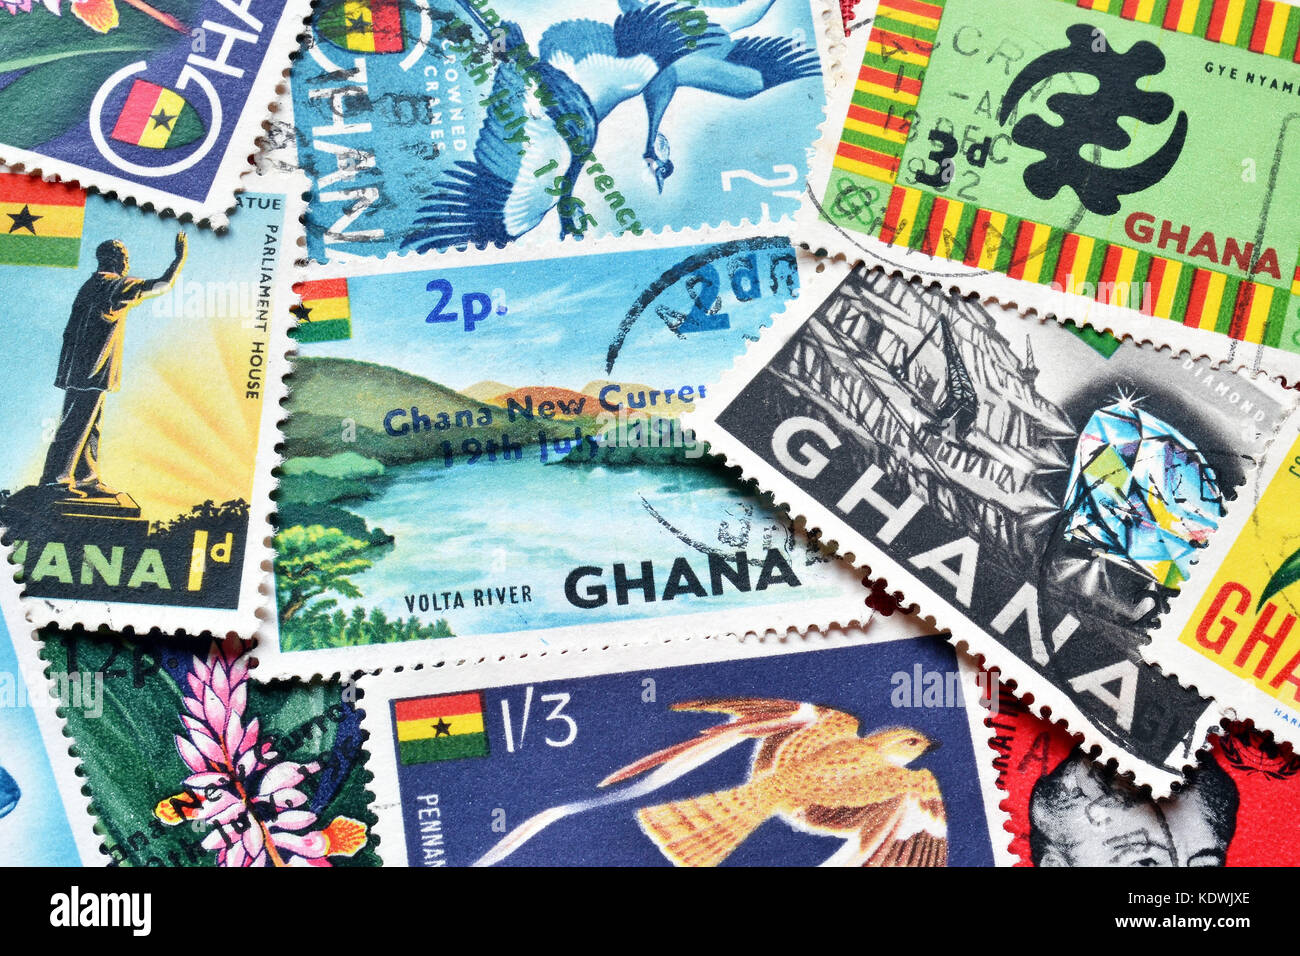 Cancelled postage stamps printed by Ghana that show different motives from Ghana. Stock Photo